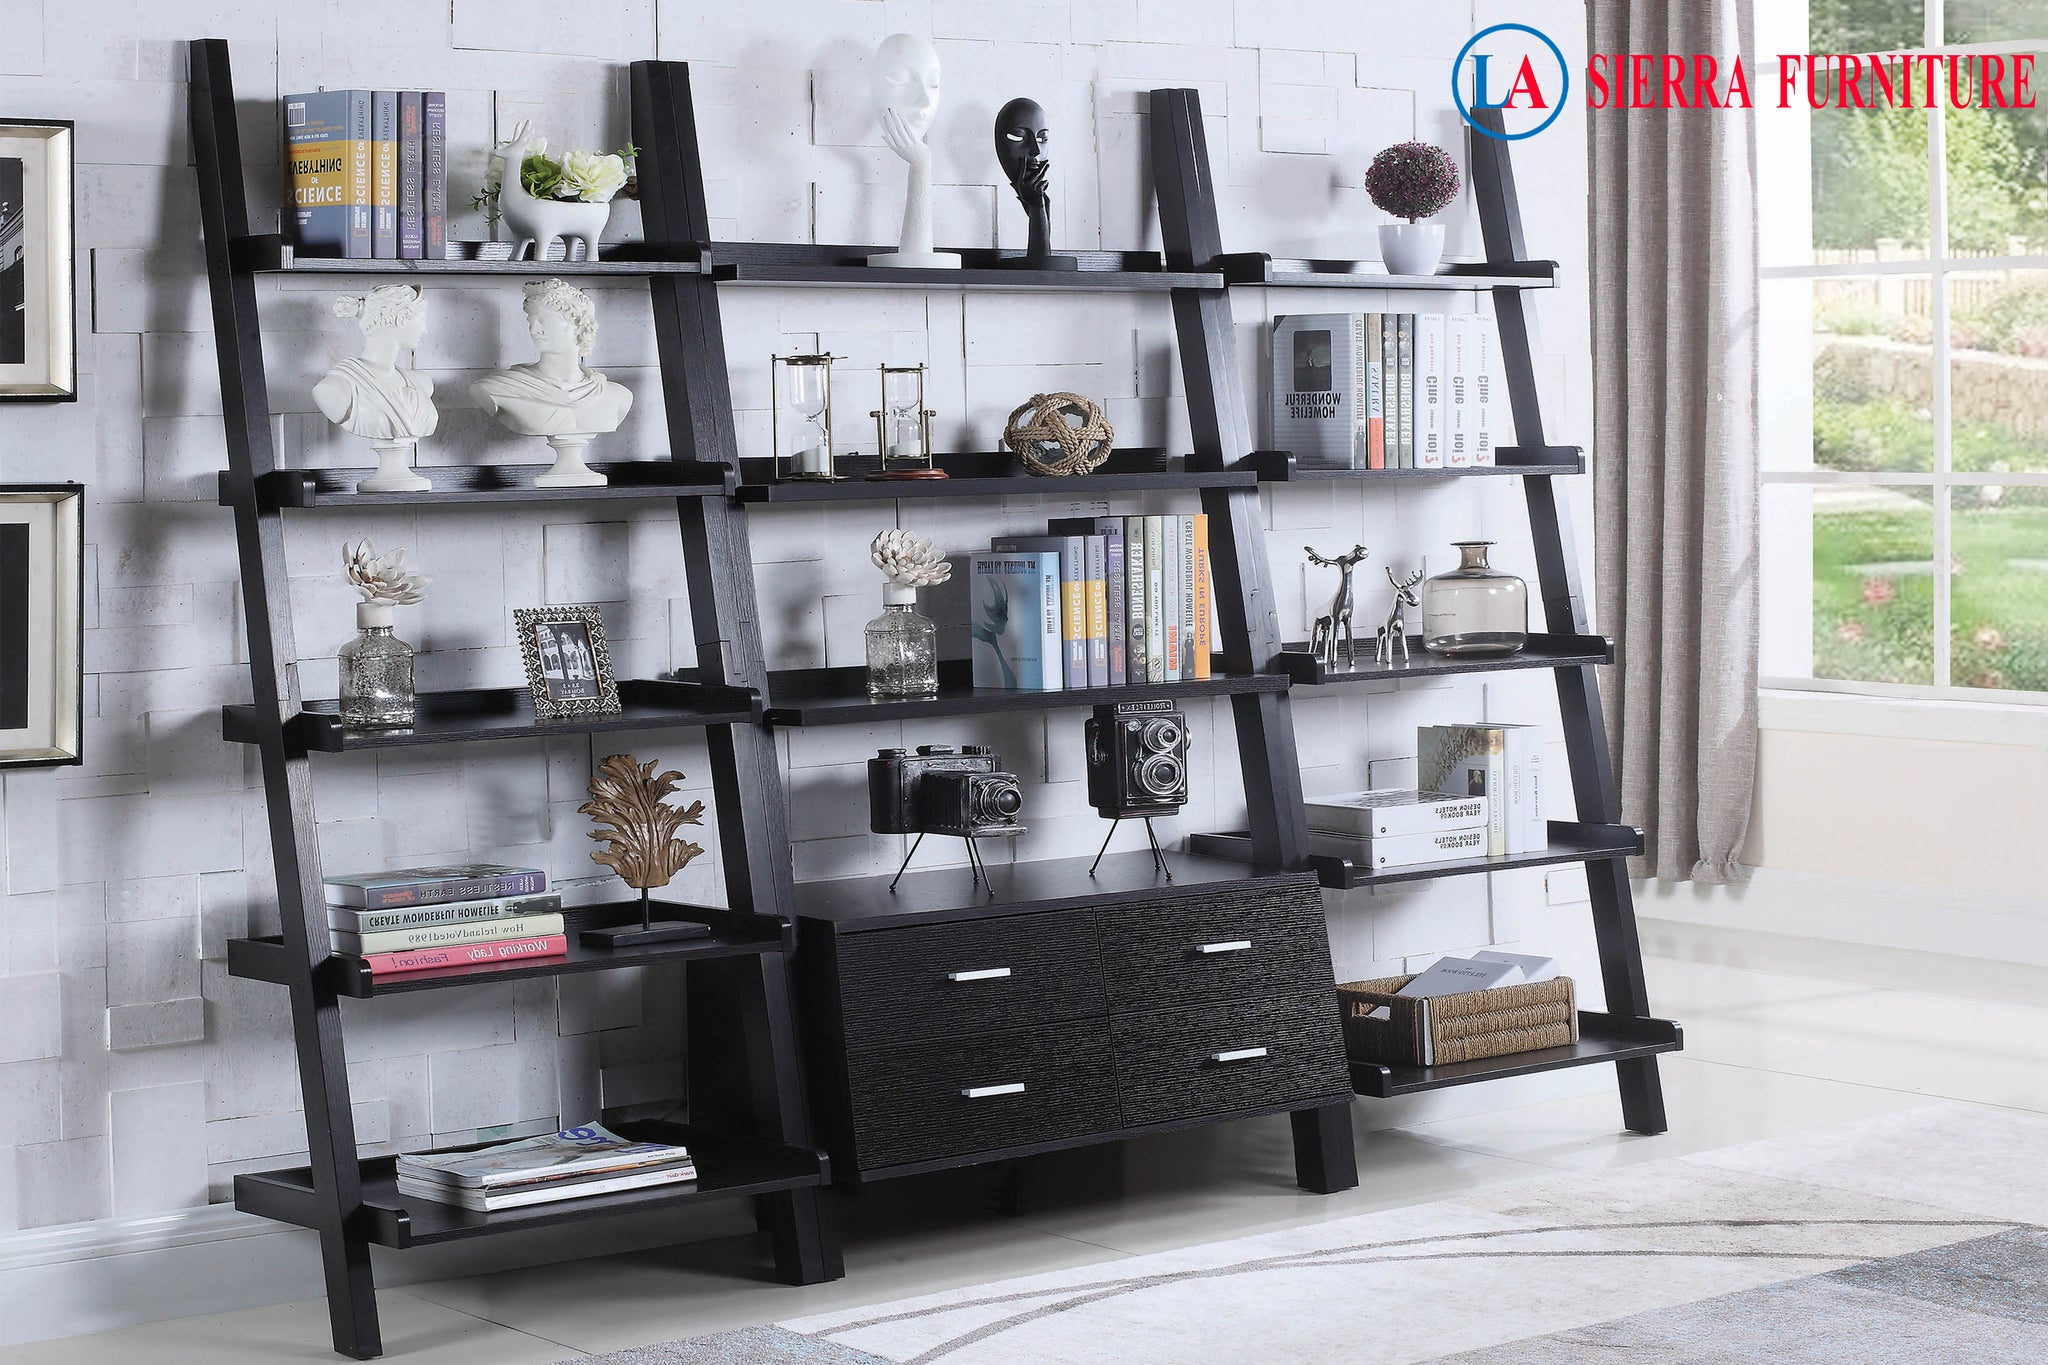 Ladder Bookcase With 4 Drawers La Sierra Furniture